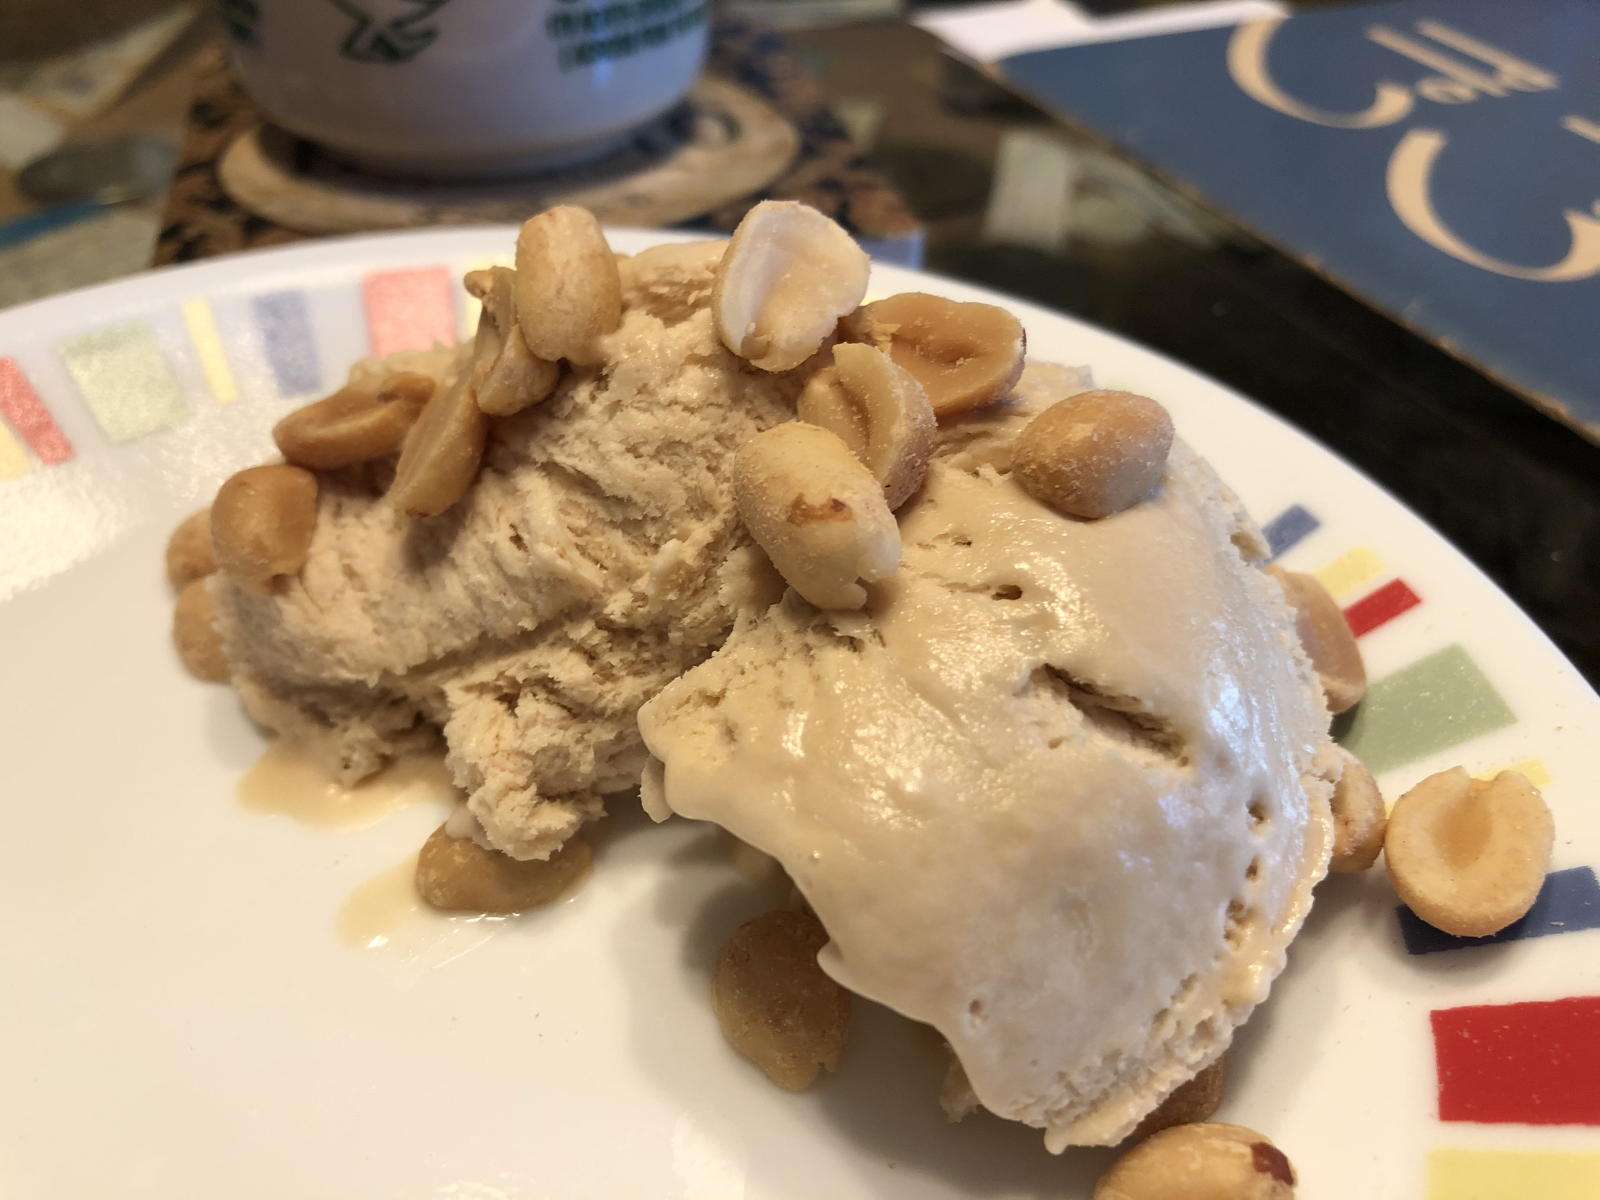 Cold Cooking maple ice cream